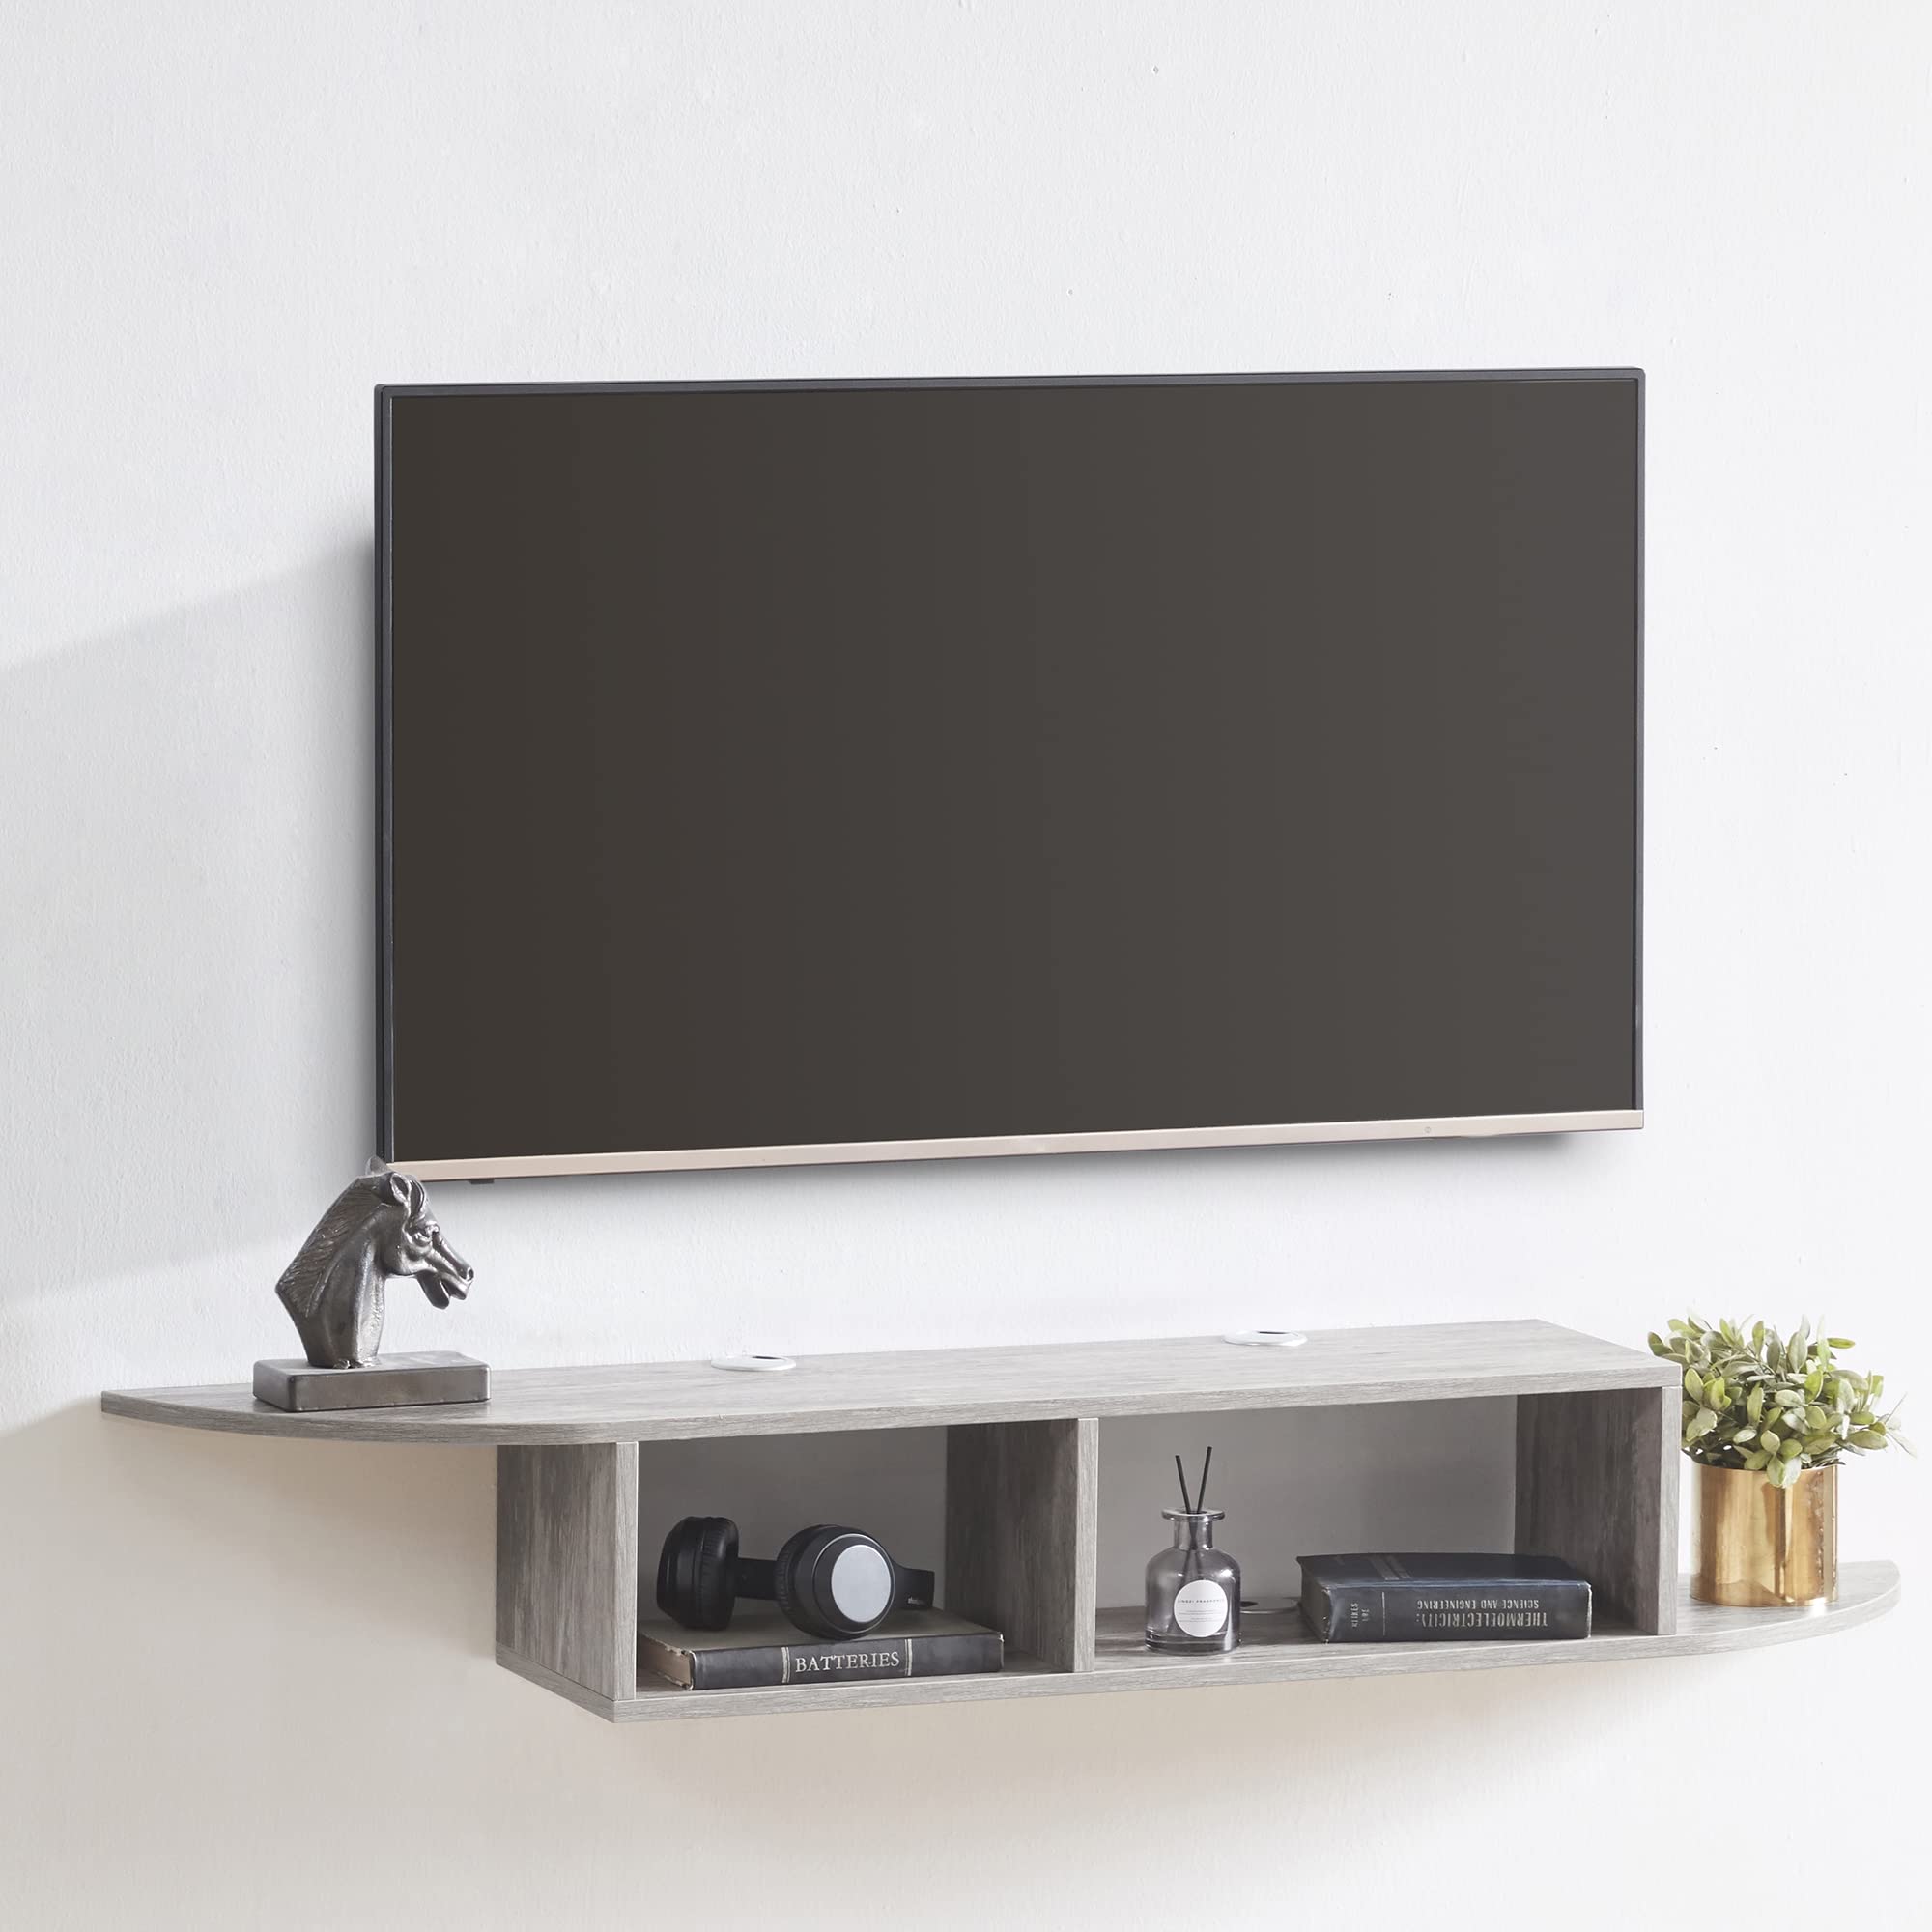 Cchenoly Floating Tv Stand Modern Wall Mounted Media Console Component Stand Wood Curved Floating Entertainment Center Tv Shelf 